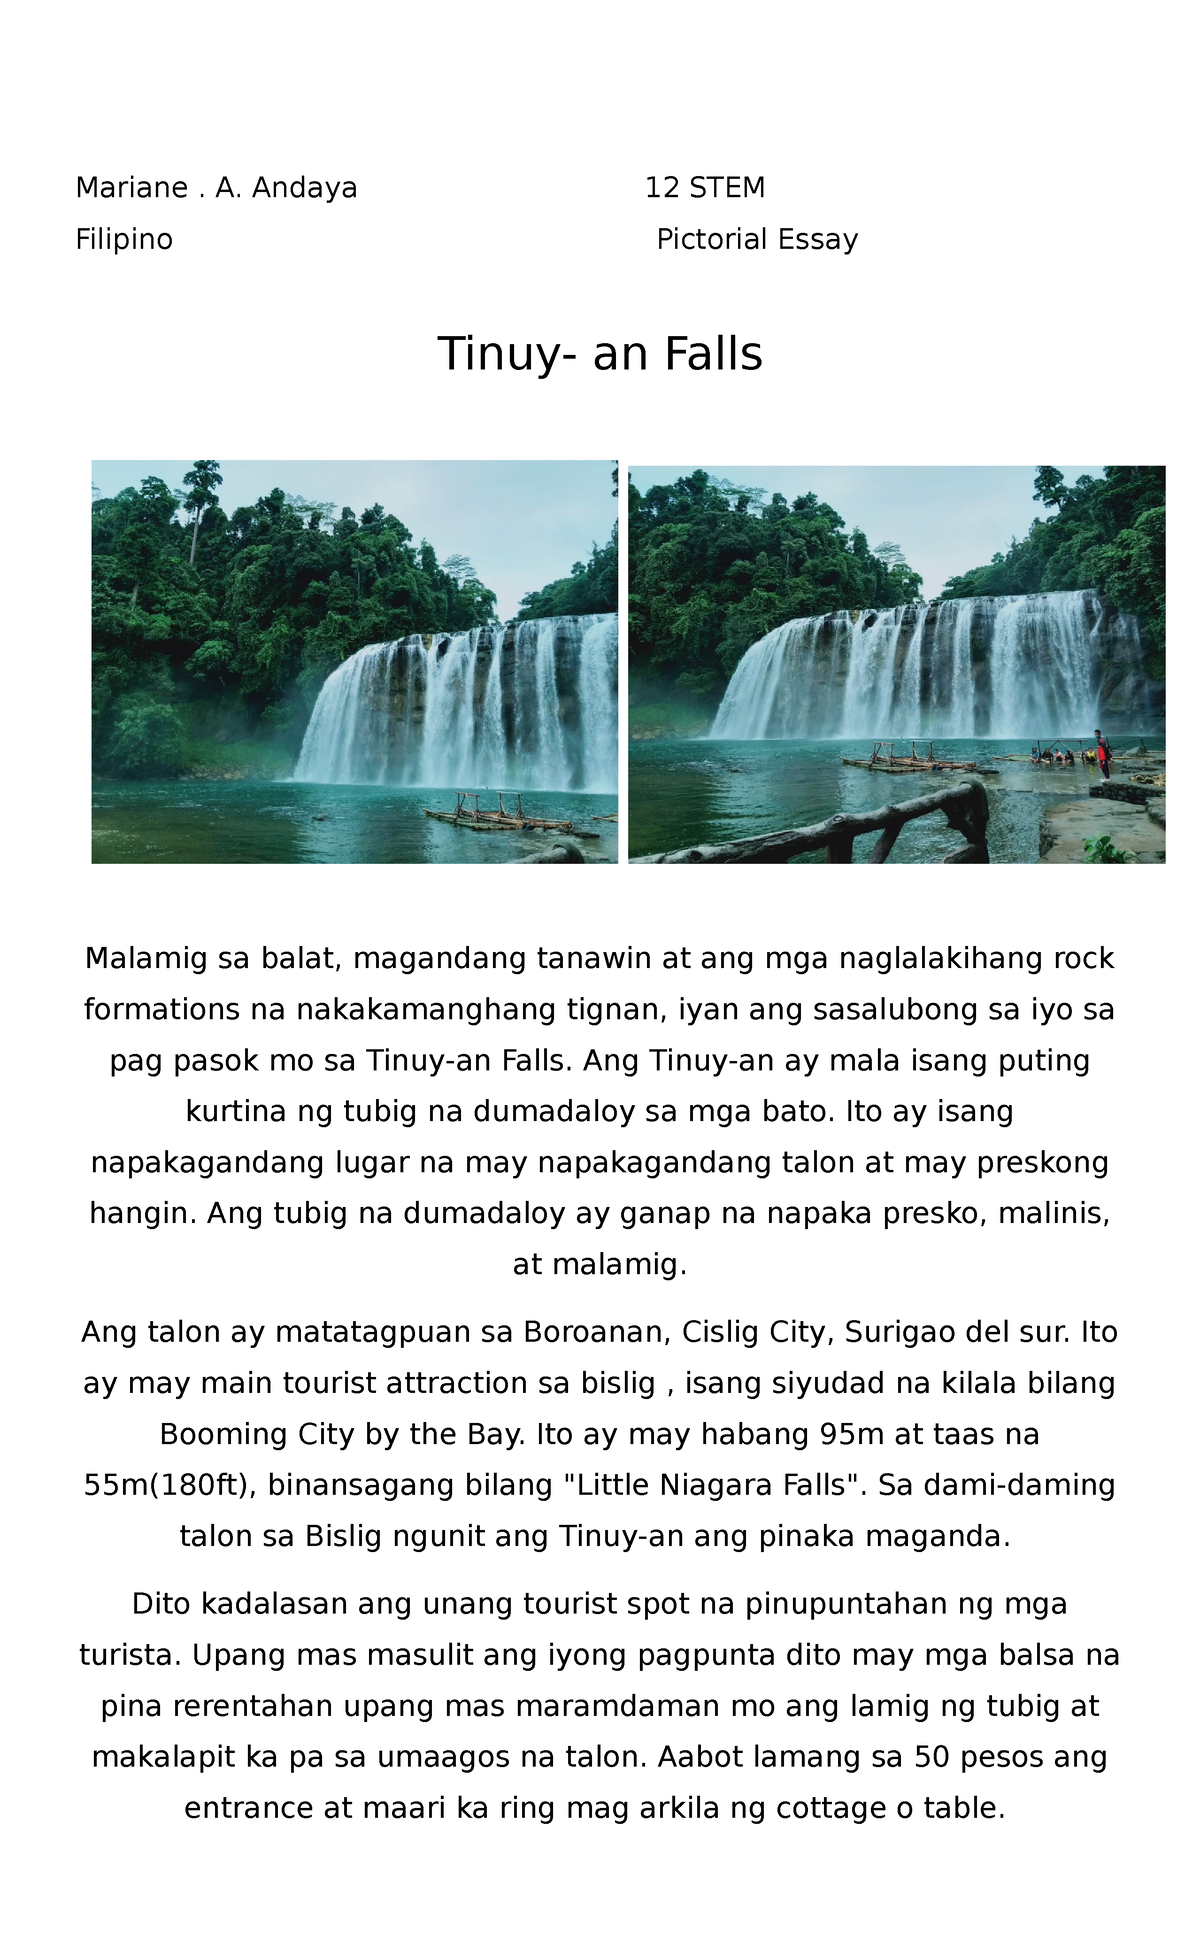 example of pictorial essay tagalog